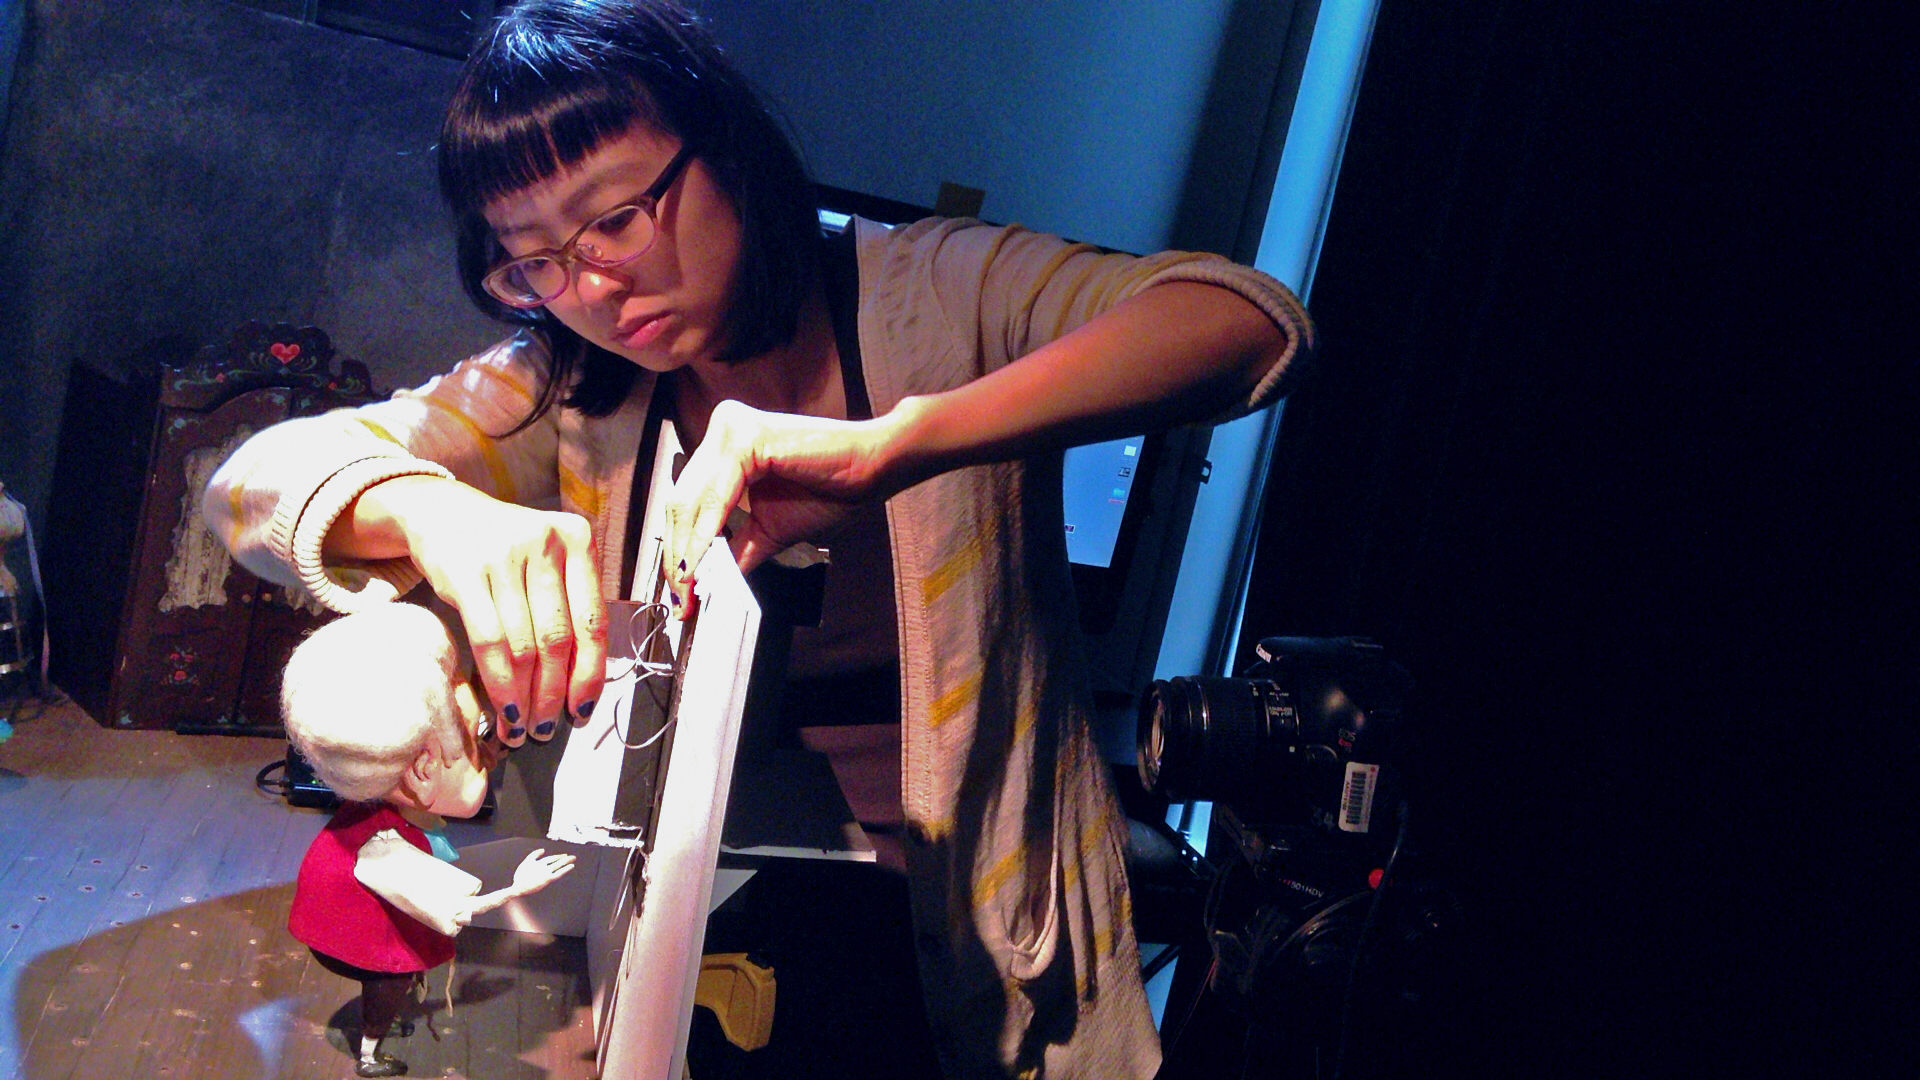 Annie Wong working on her film, "Coppelia"